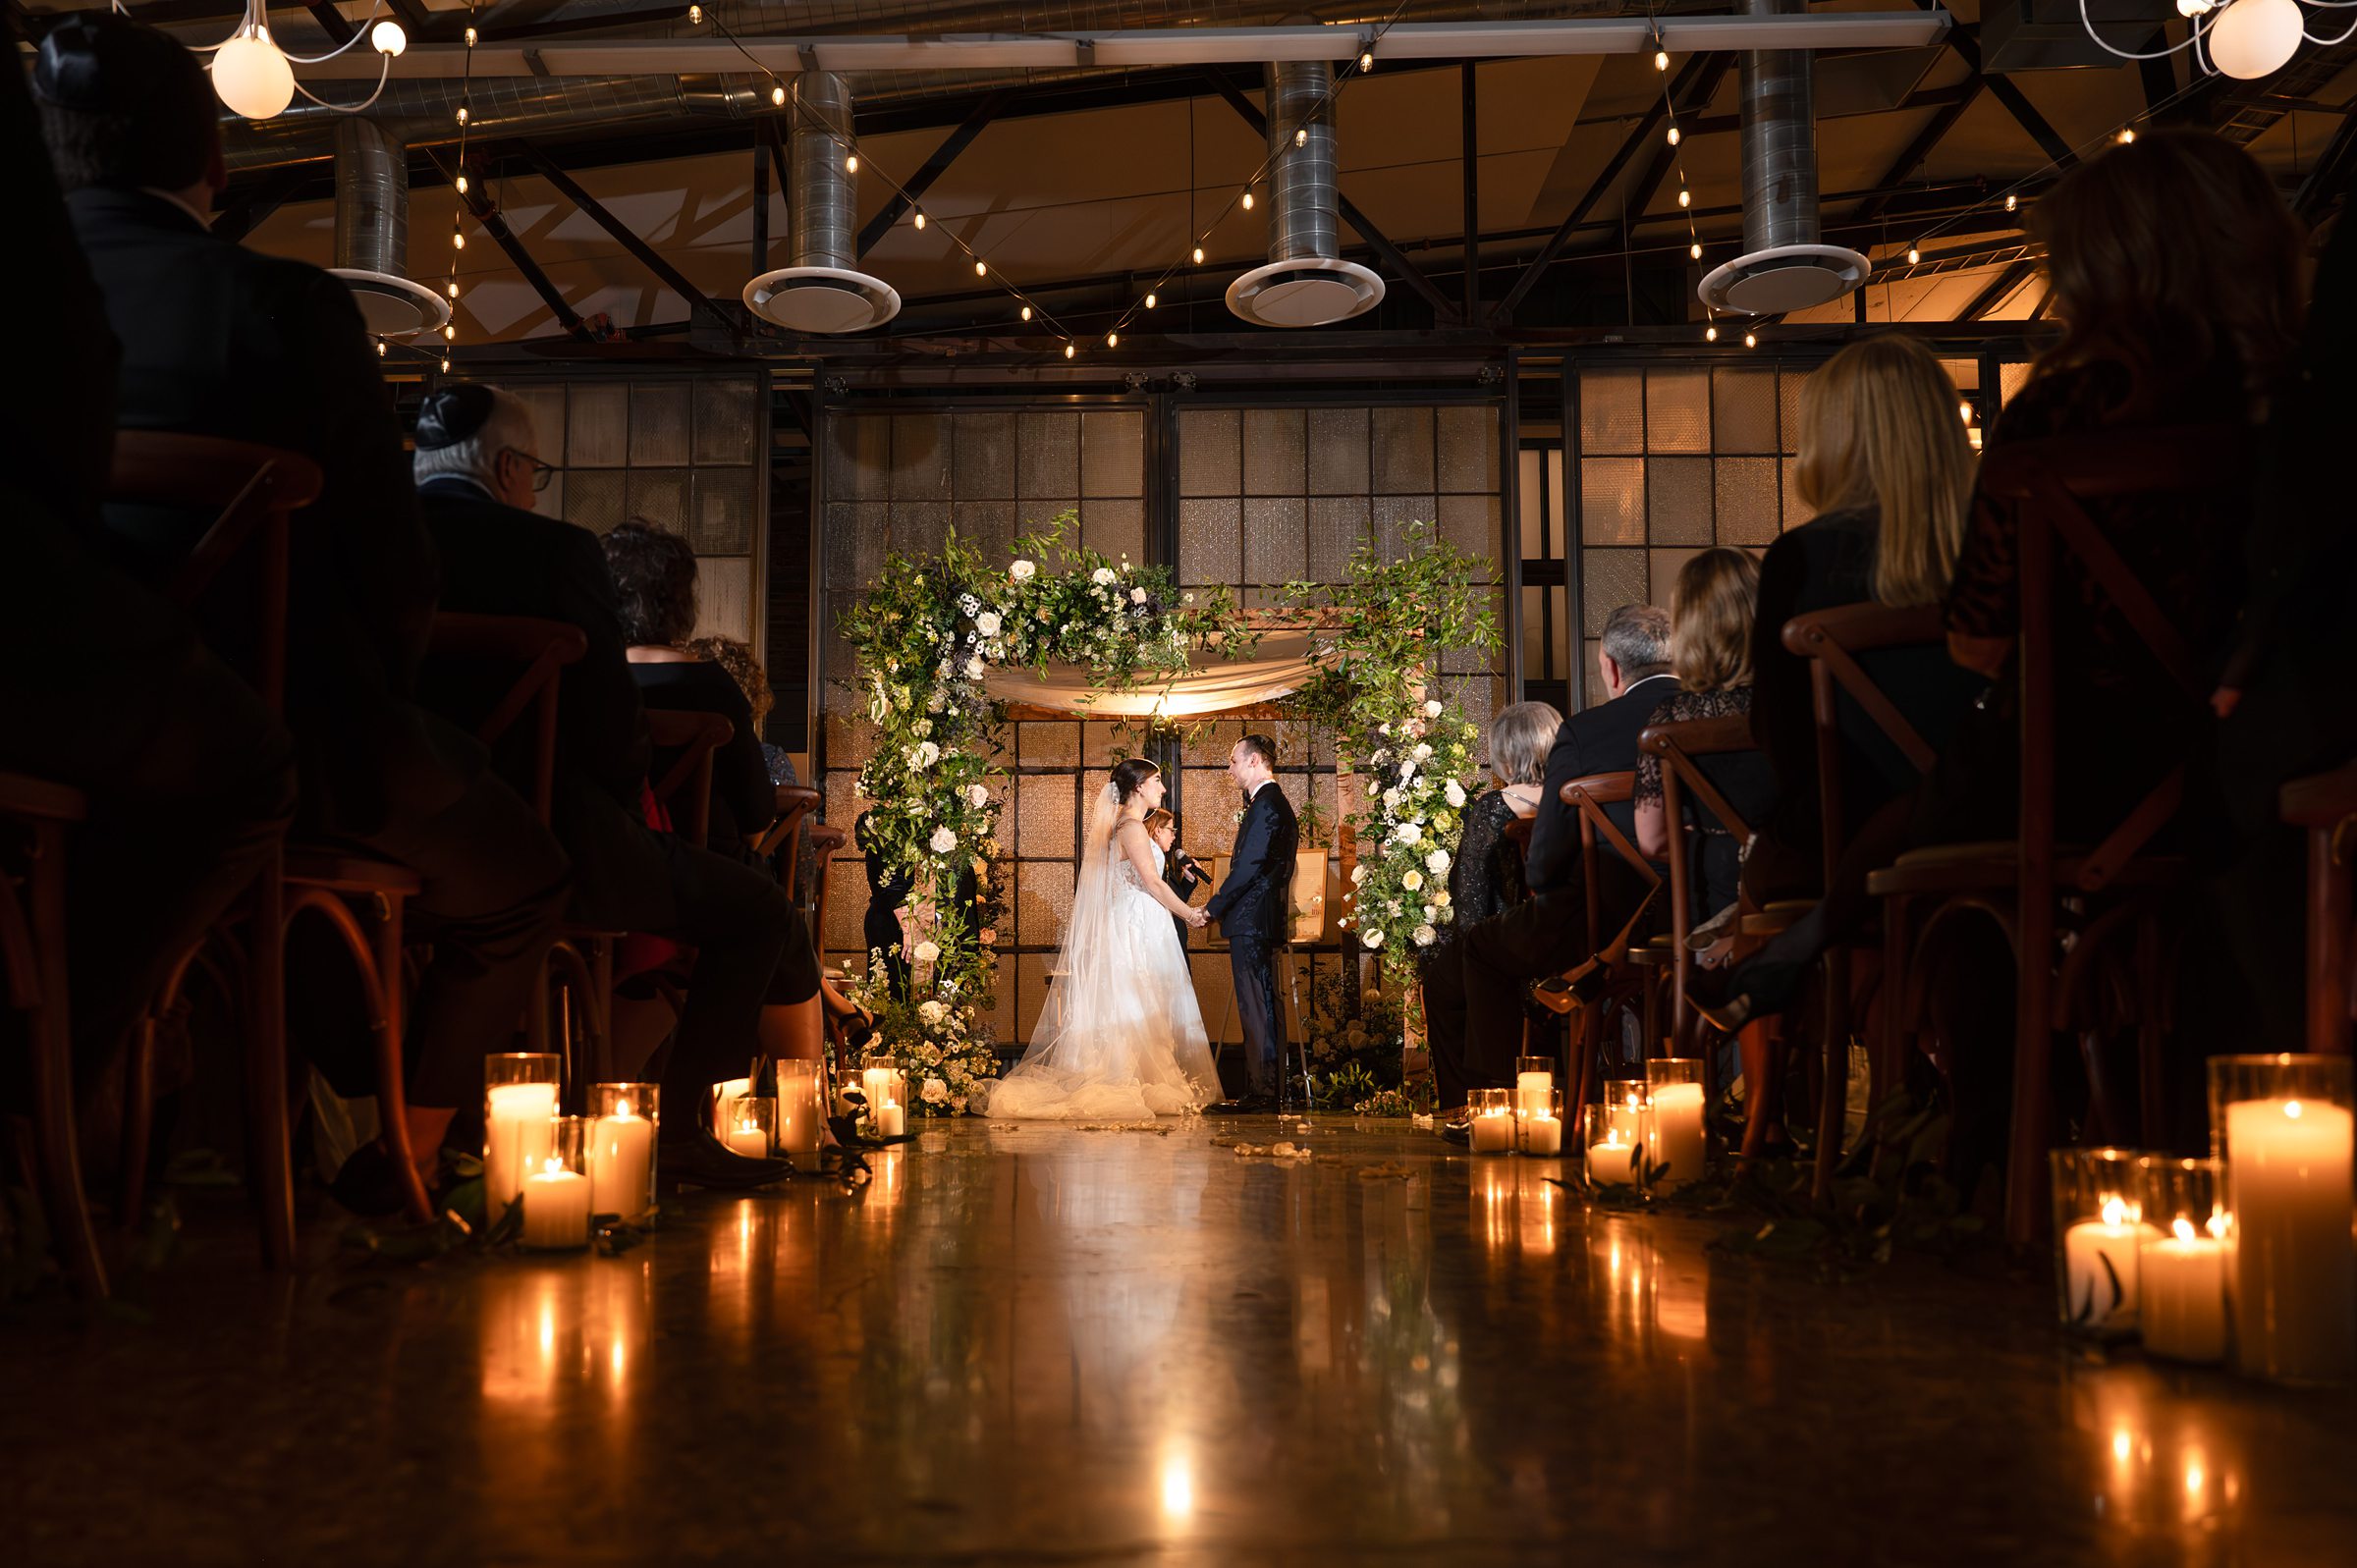 A bride and groom walk down the aisle at a Lilah Events wedding, with candles in the background.